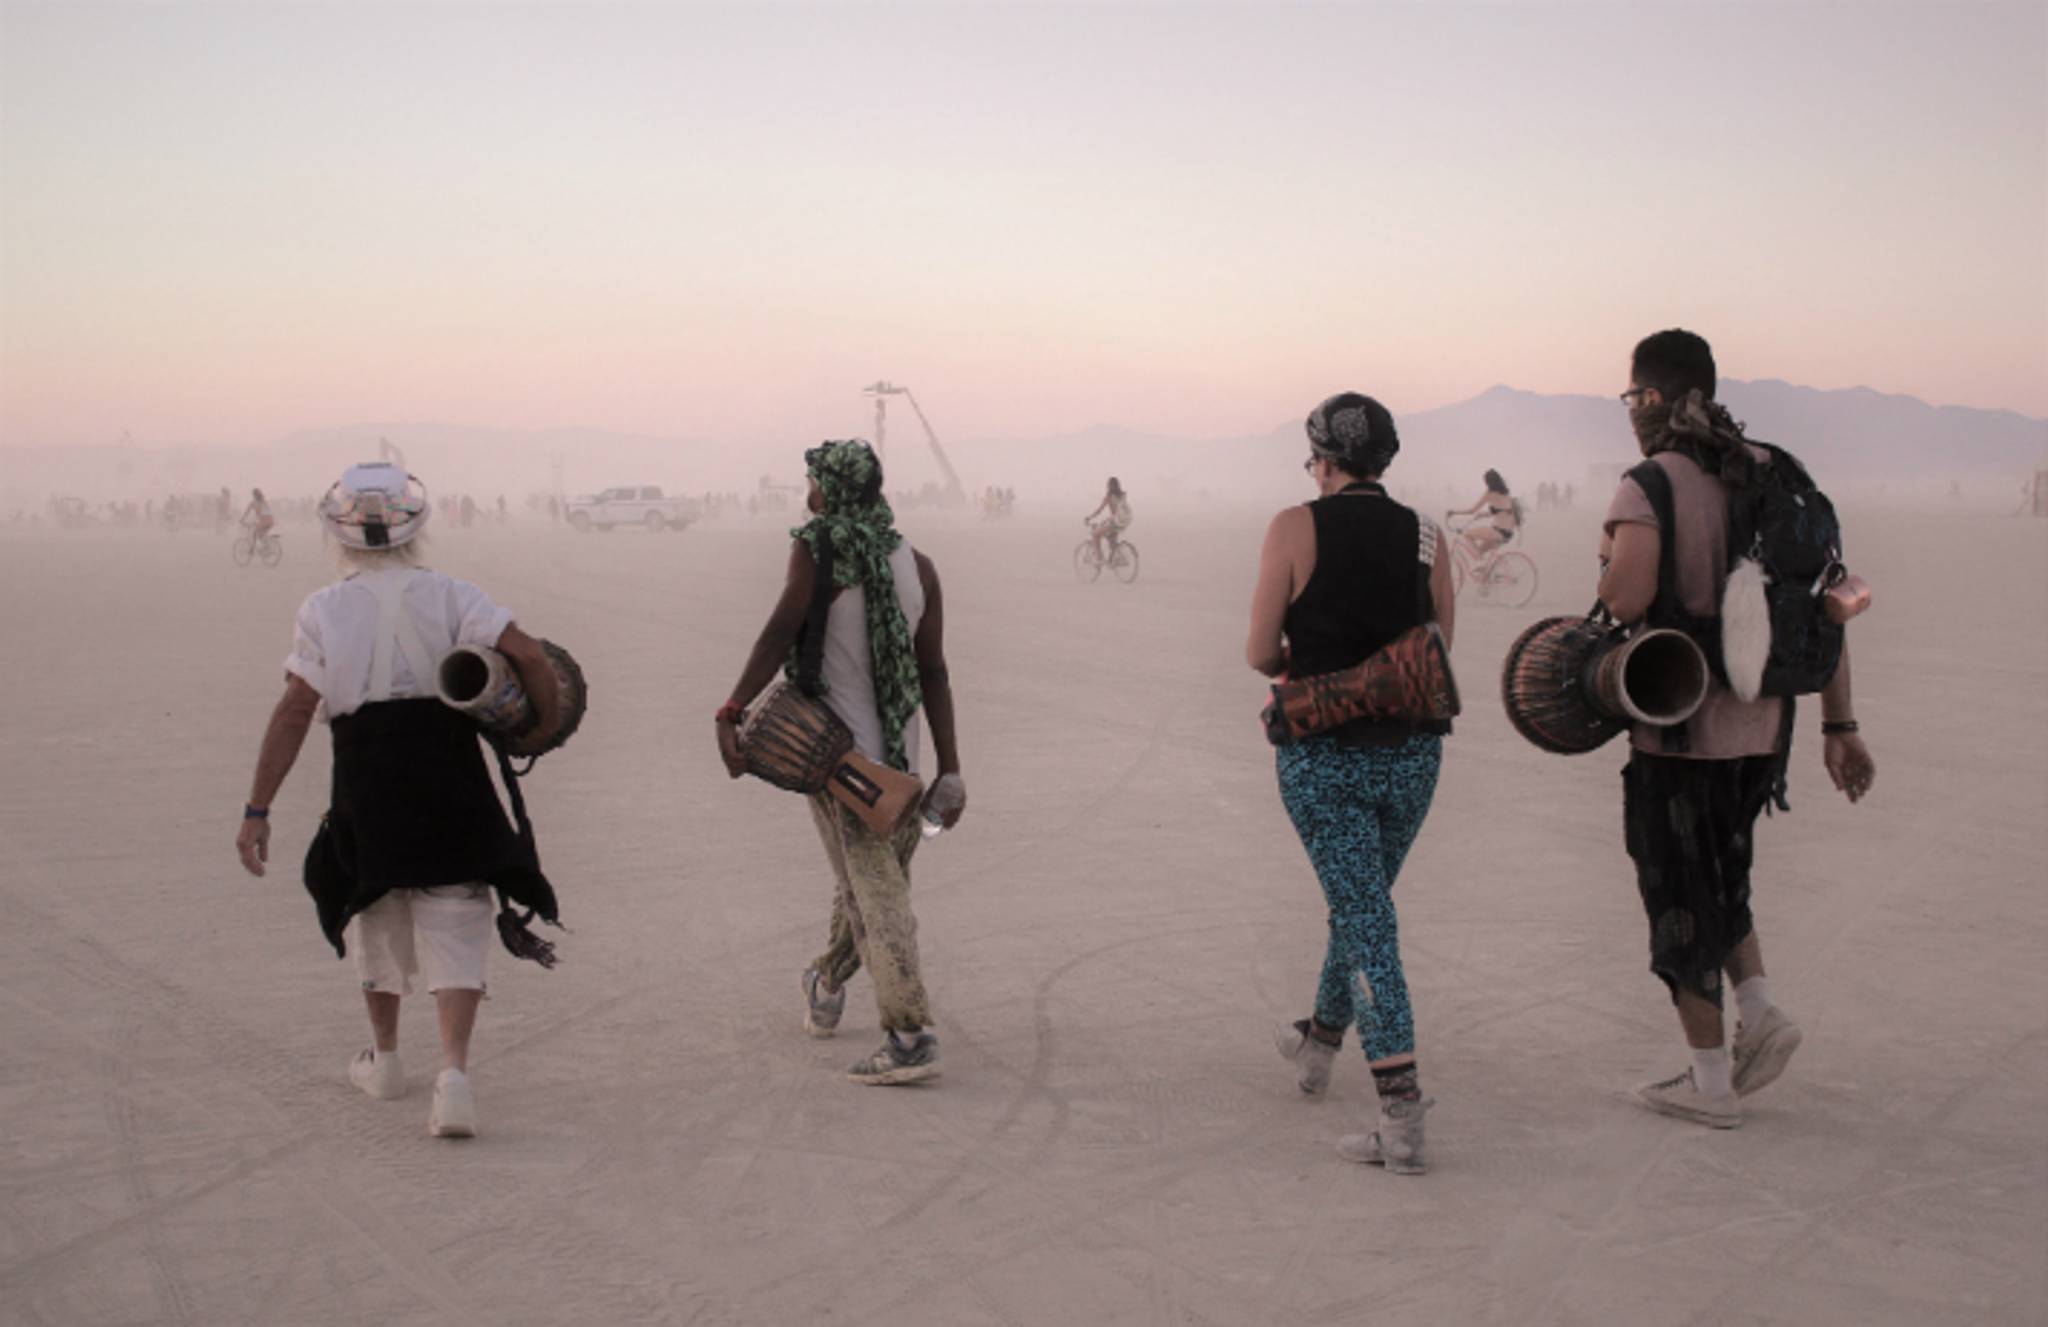 Burning Man is cracking down on Instagram culture